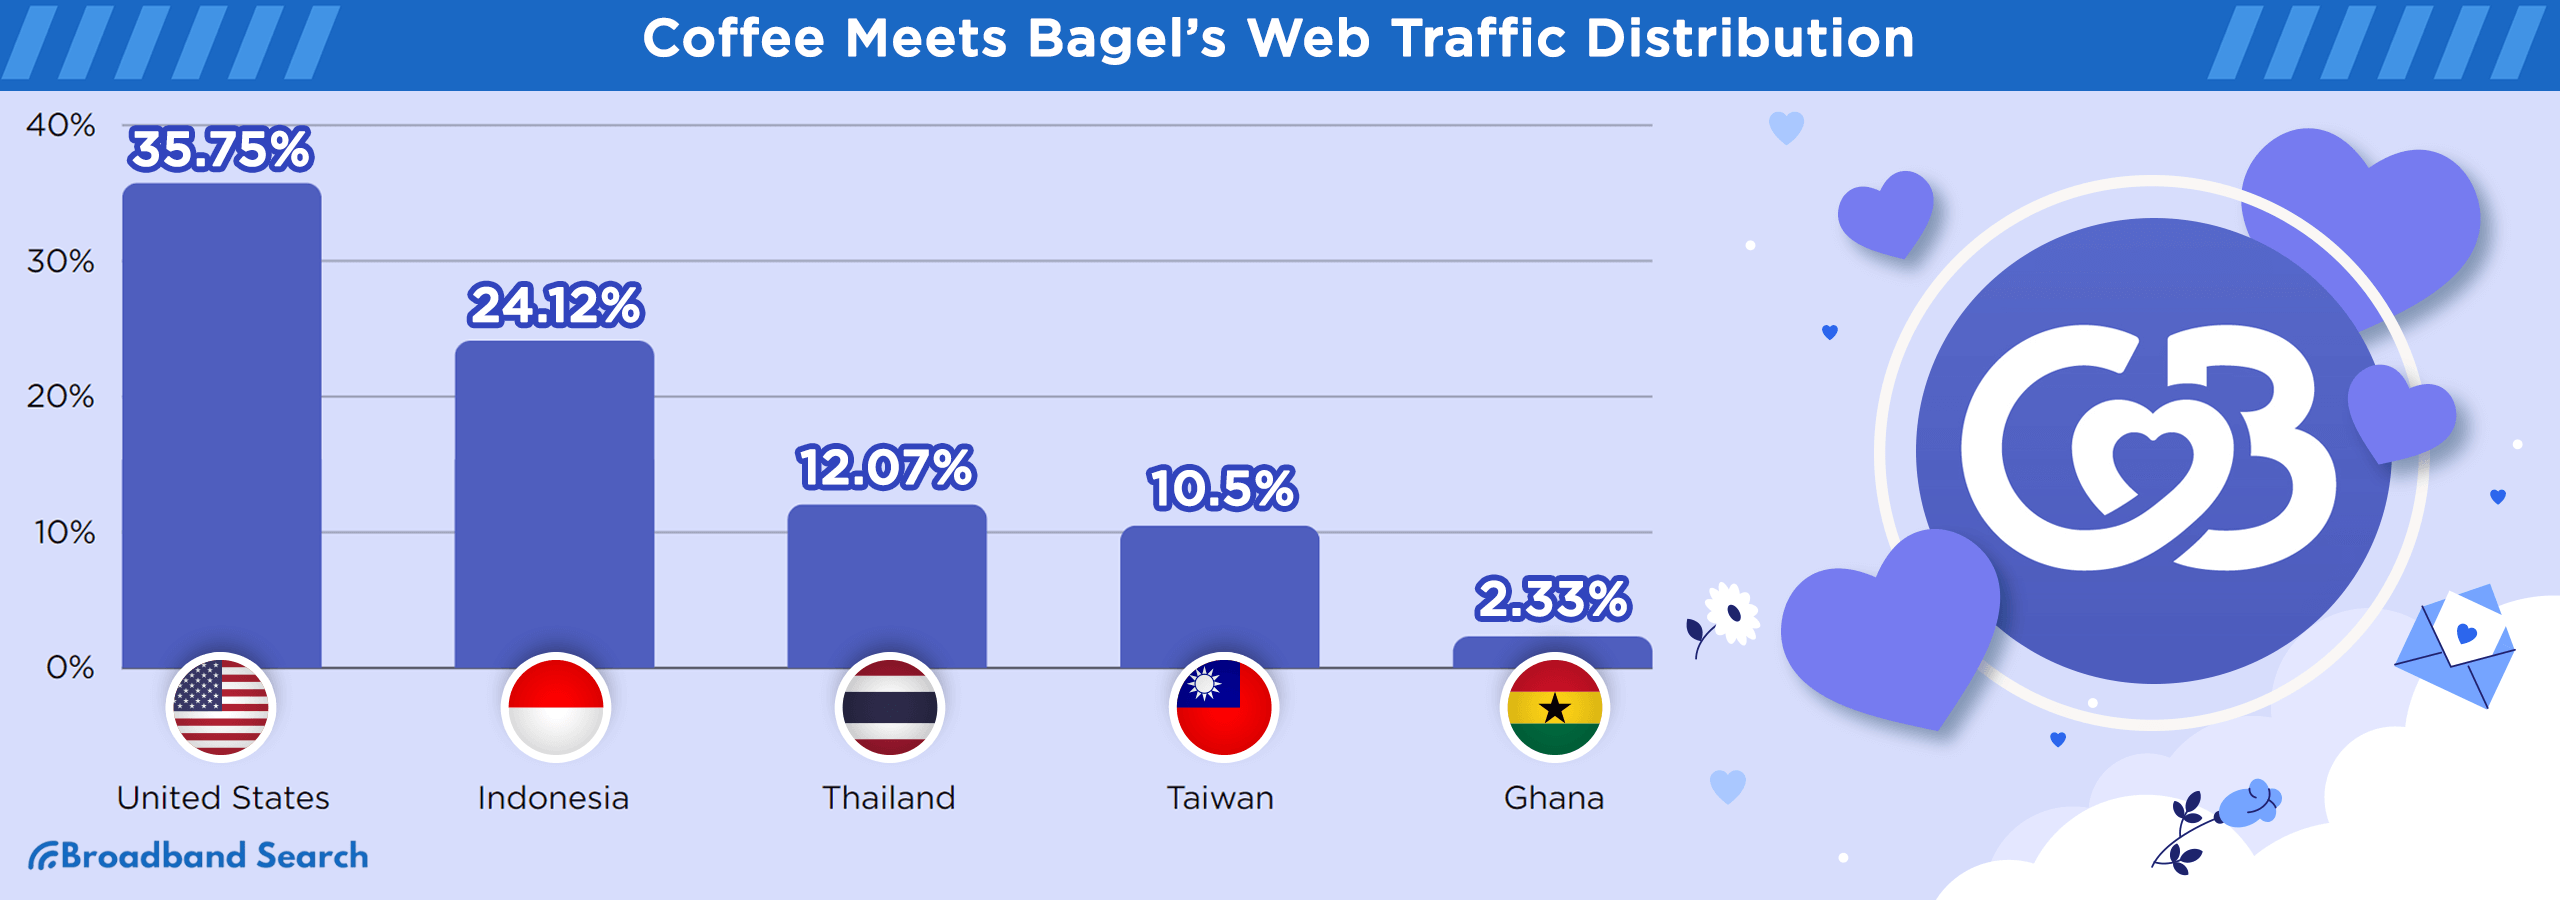 Web traffic Distribution per country by Coffee Meets Bagel